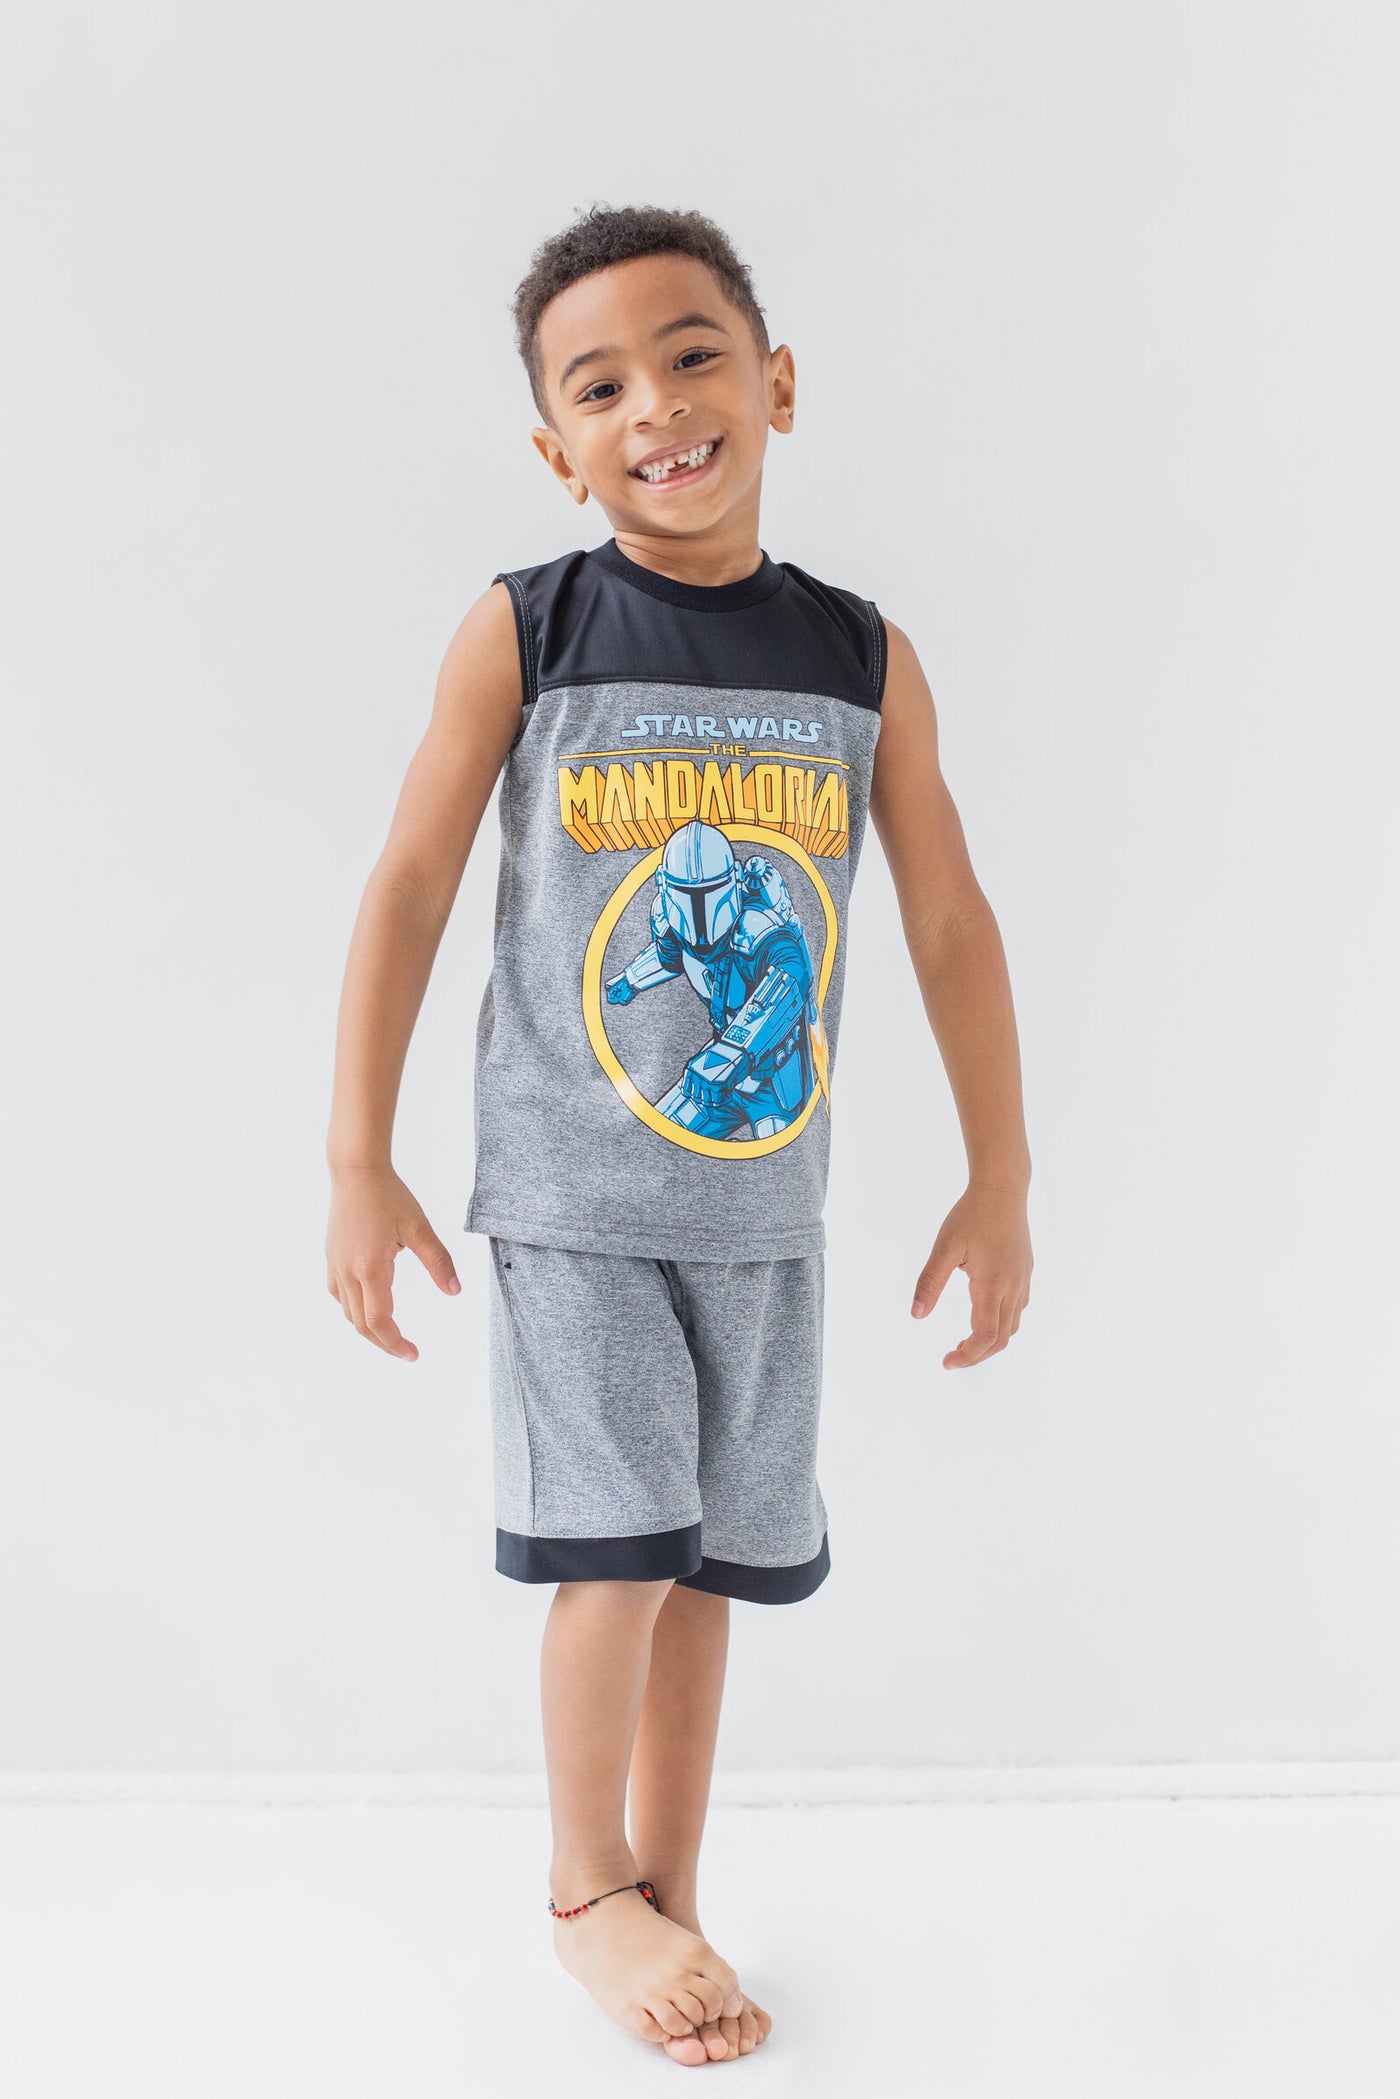 Star Wars The Mandalorian Athletic Pullover T-Shirt Tank Top and Shorts 3 Piece Outfit Set Little Kid to Big Kid